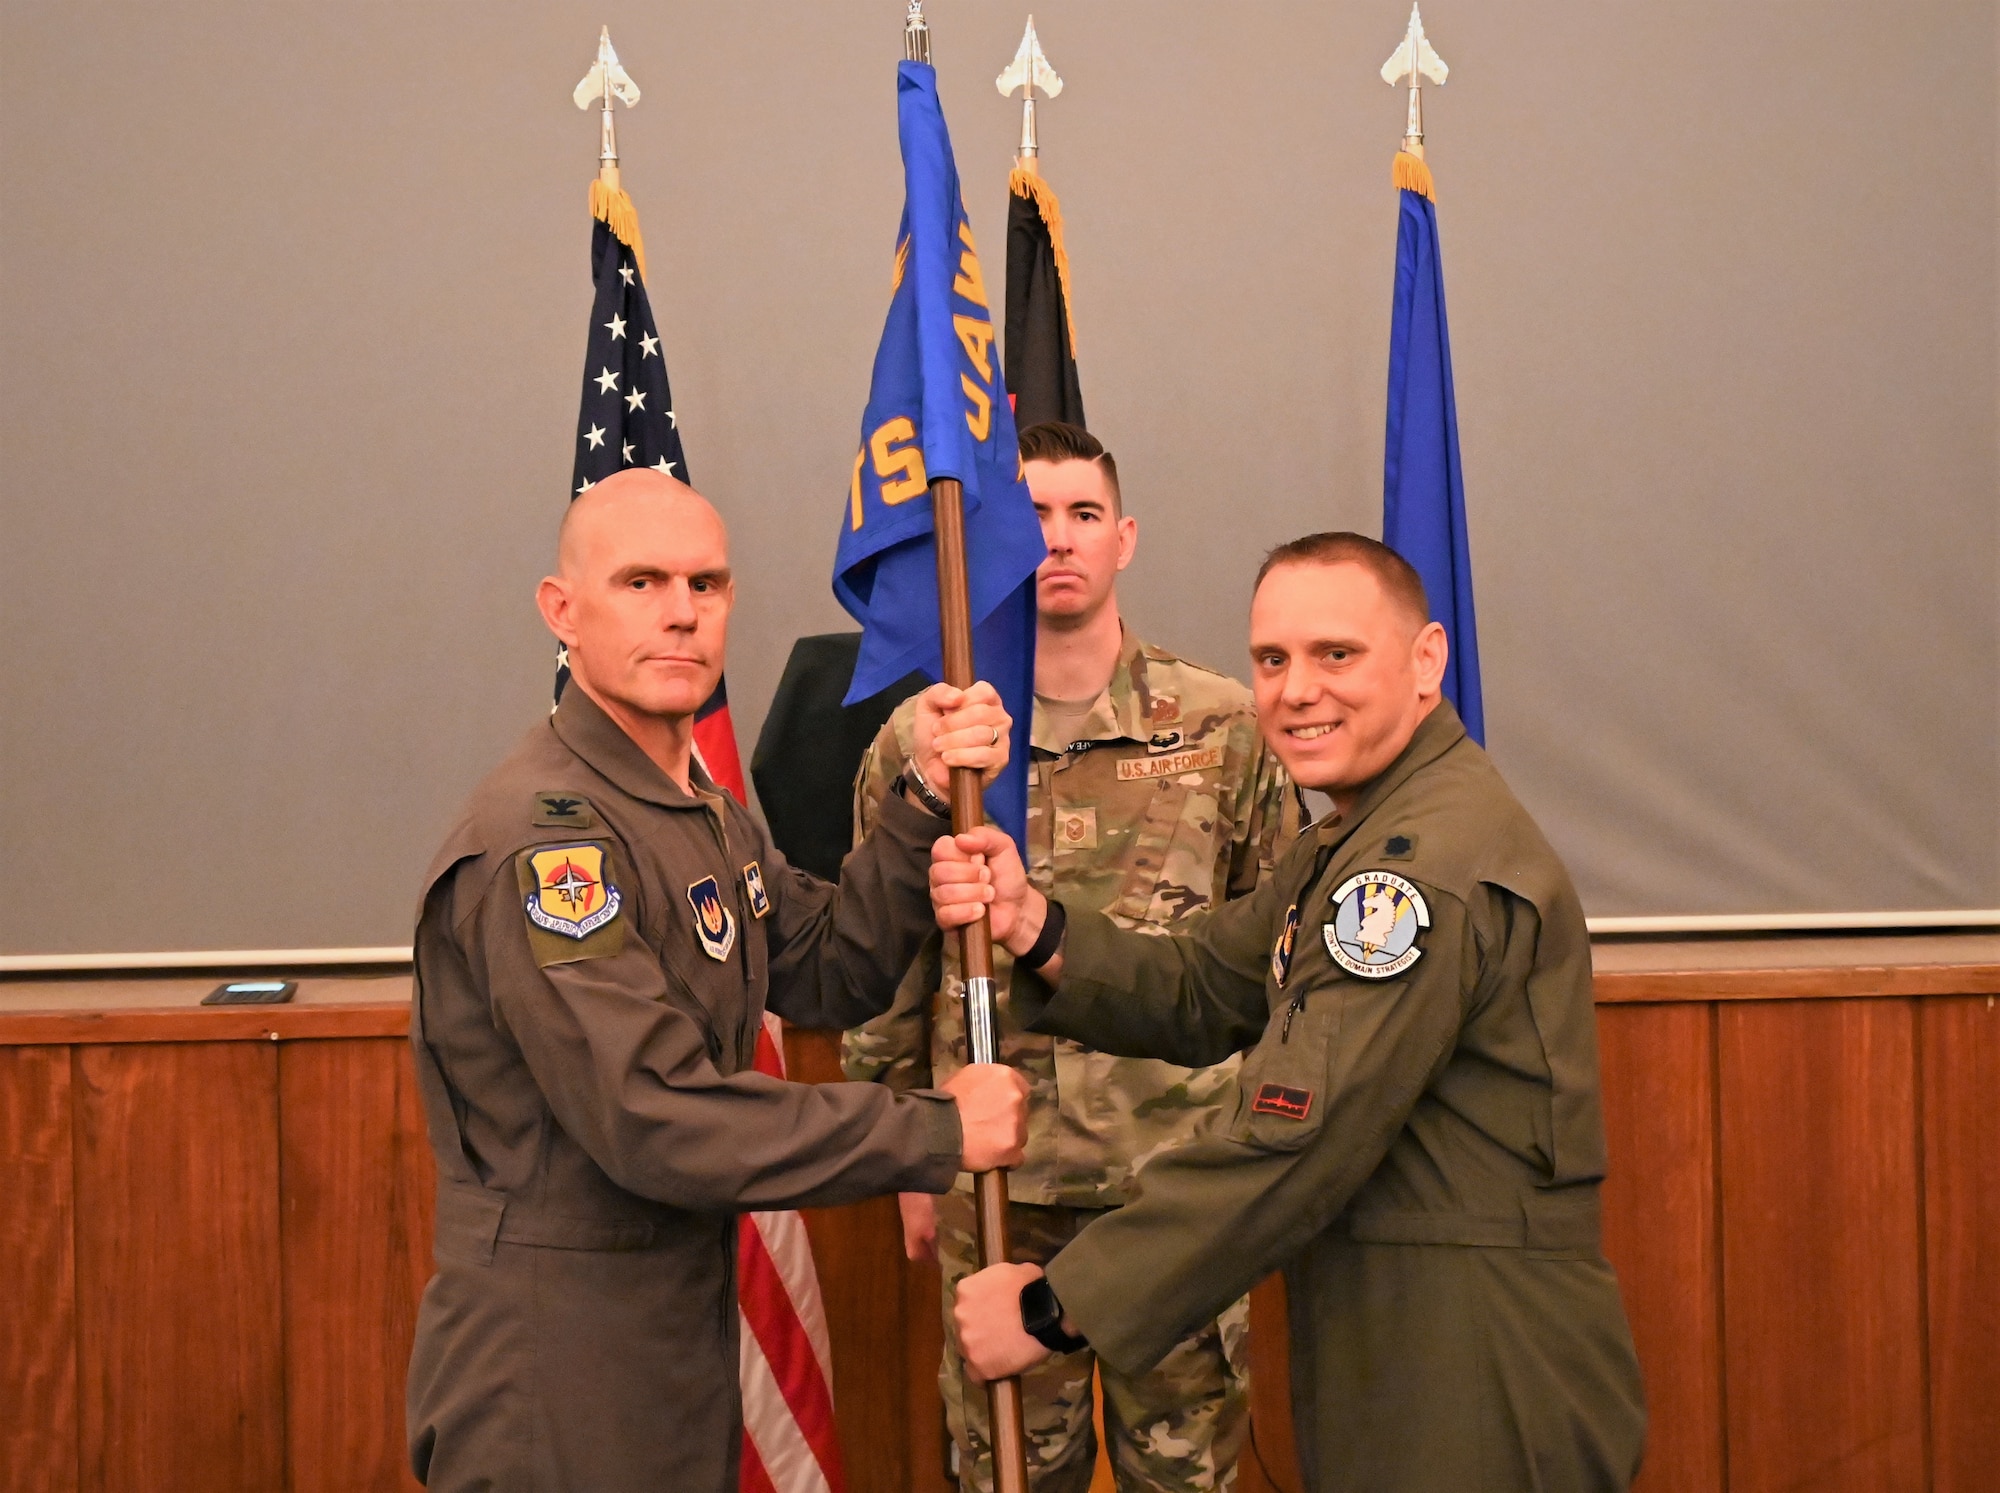 U.S. Air Force Col. Dean Berck, left, United States Air Forces in Europe and Air Forces Africa Warfare Center Commander, presents the guidon to Lt. Col. Ryan O'Neil, right, 5th Combat Training Squadron outgoing commander, at Einsiedlerhof Military Complex, Germany, June 6, 2023.